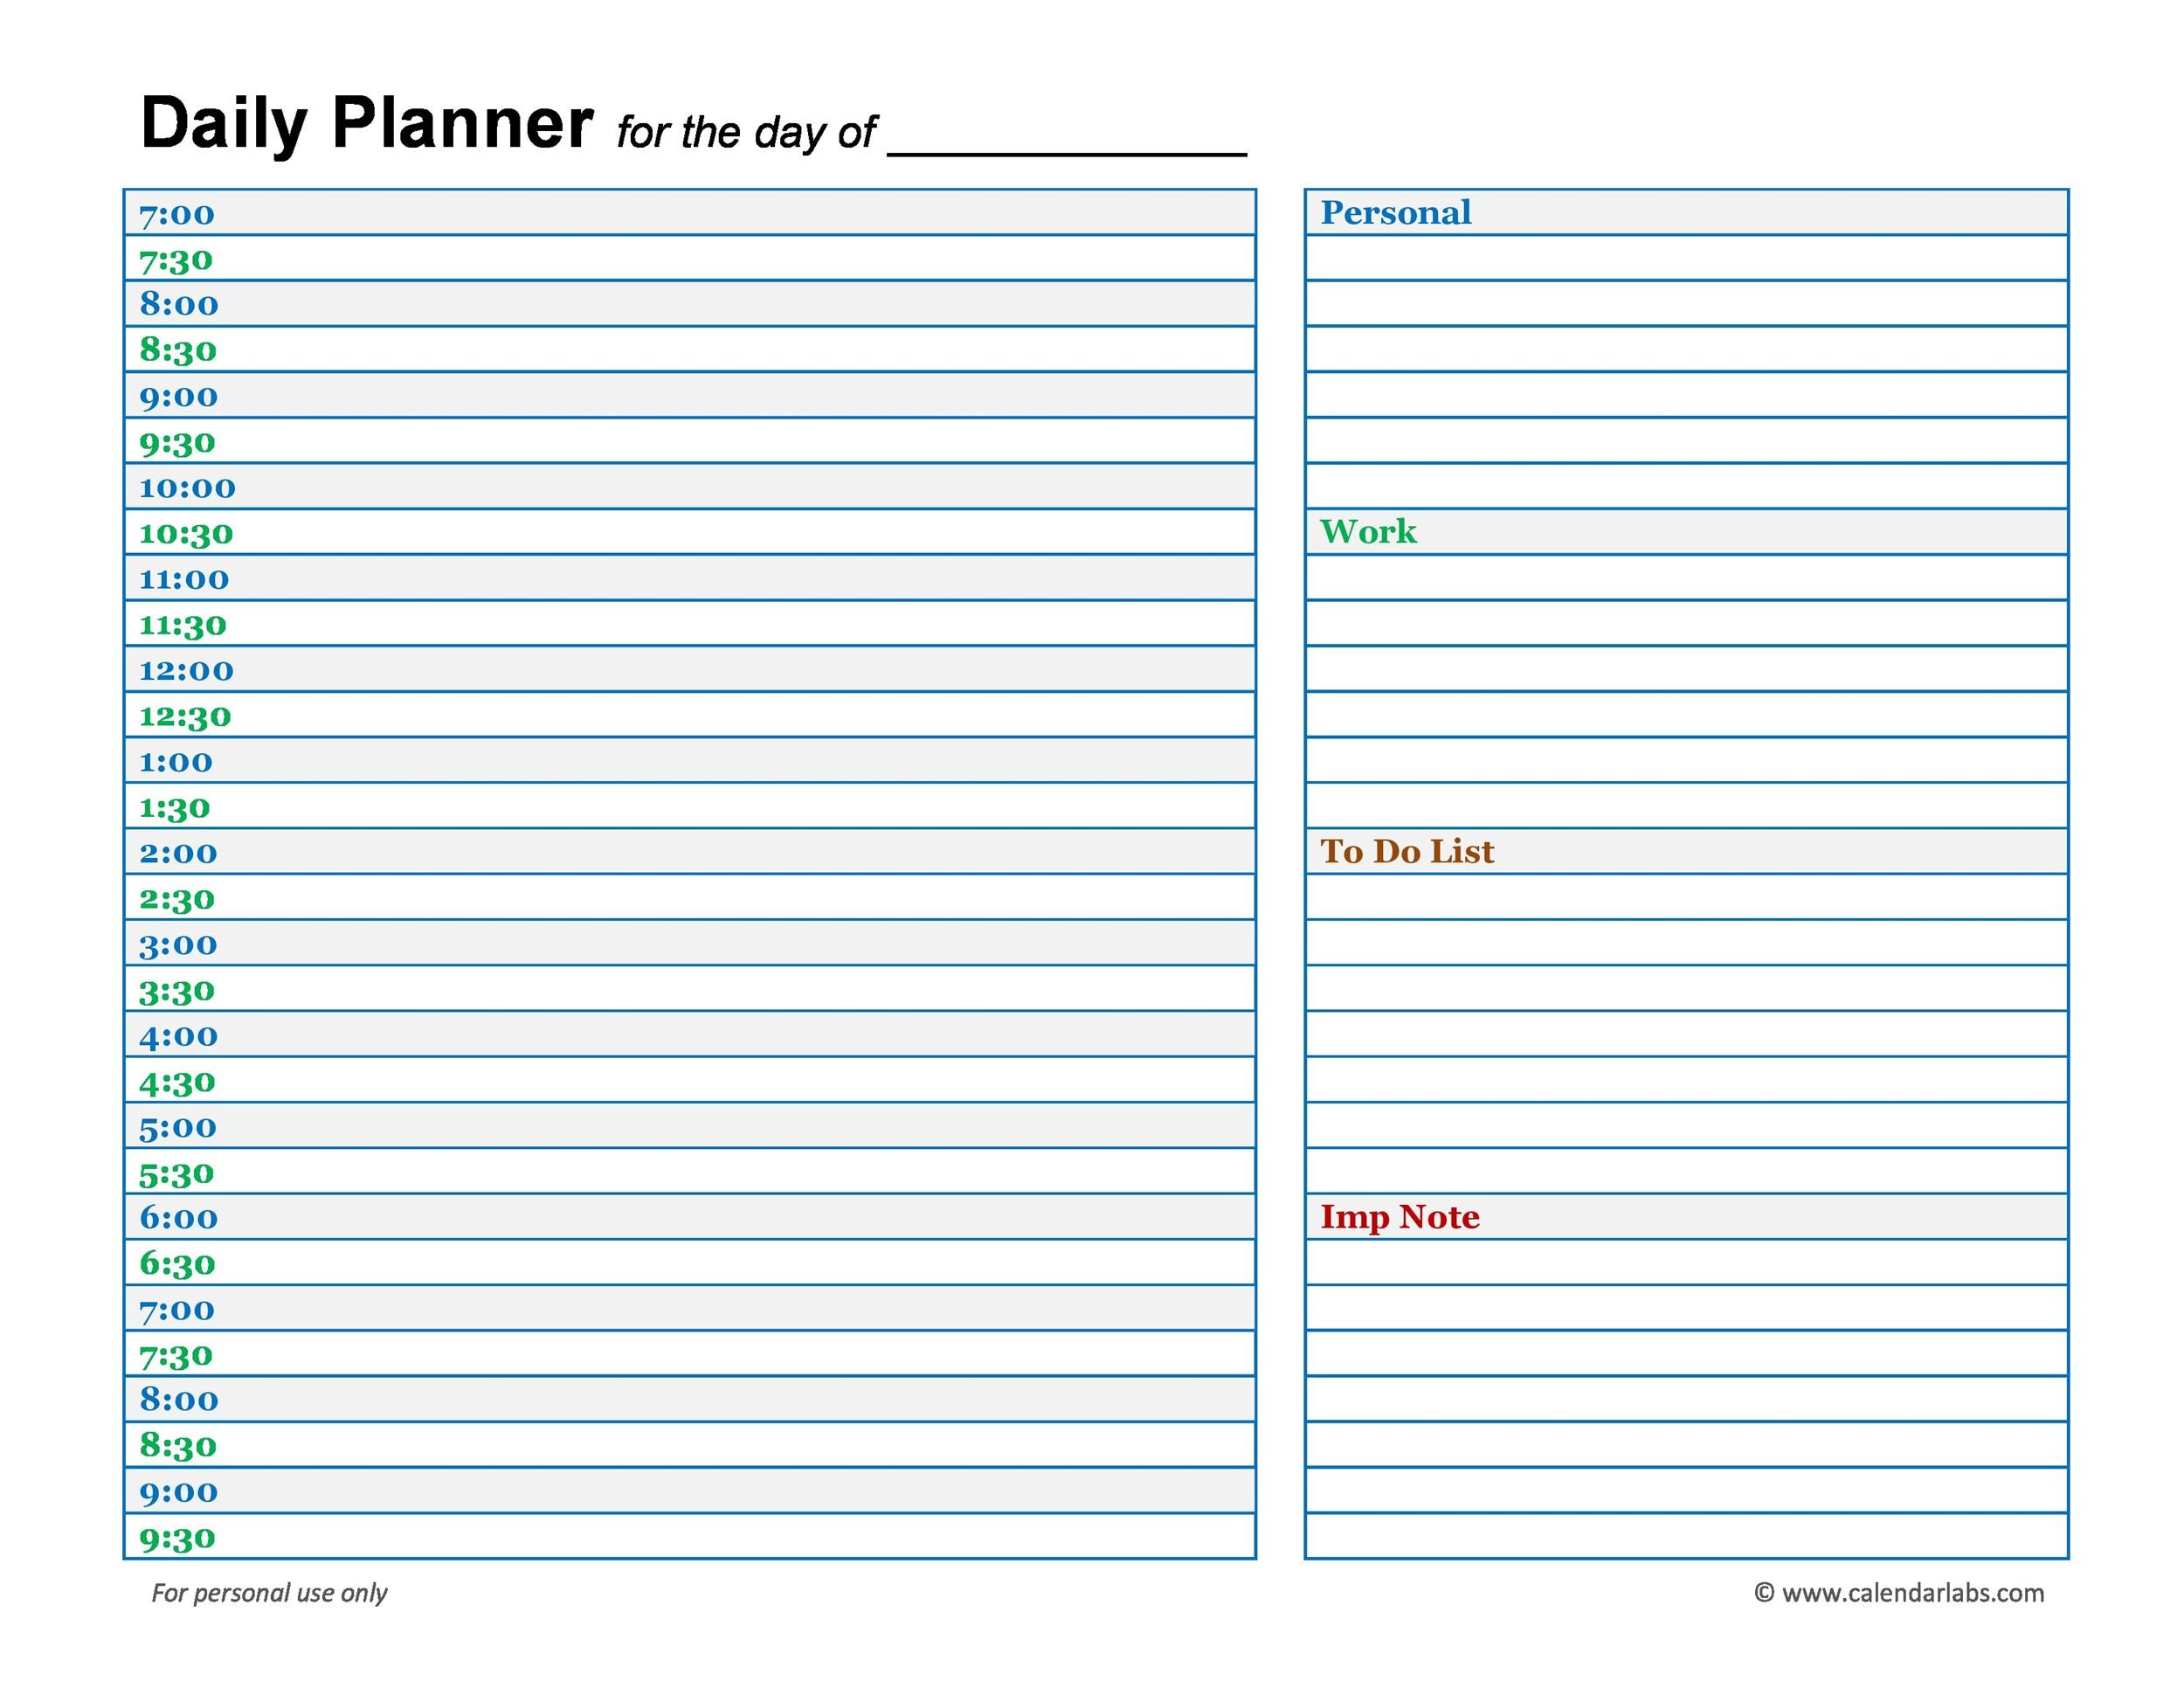 47 Printable Daily Planner Templates FREE In Word Excel PDF 